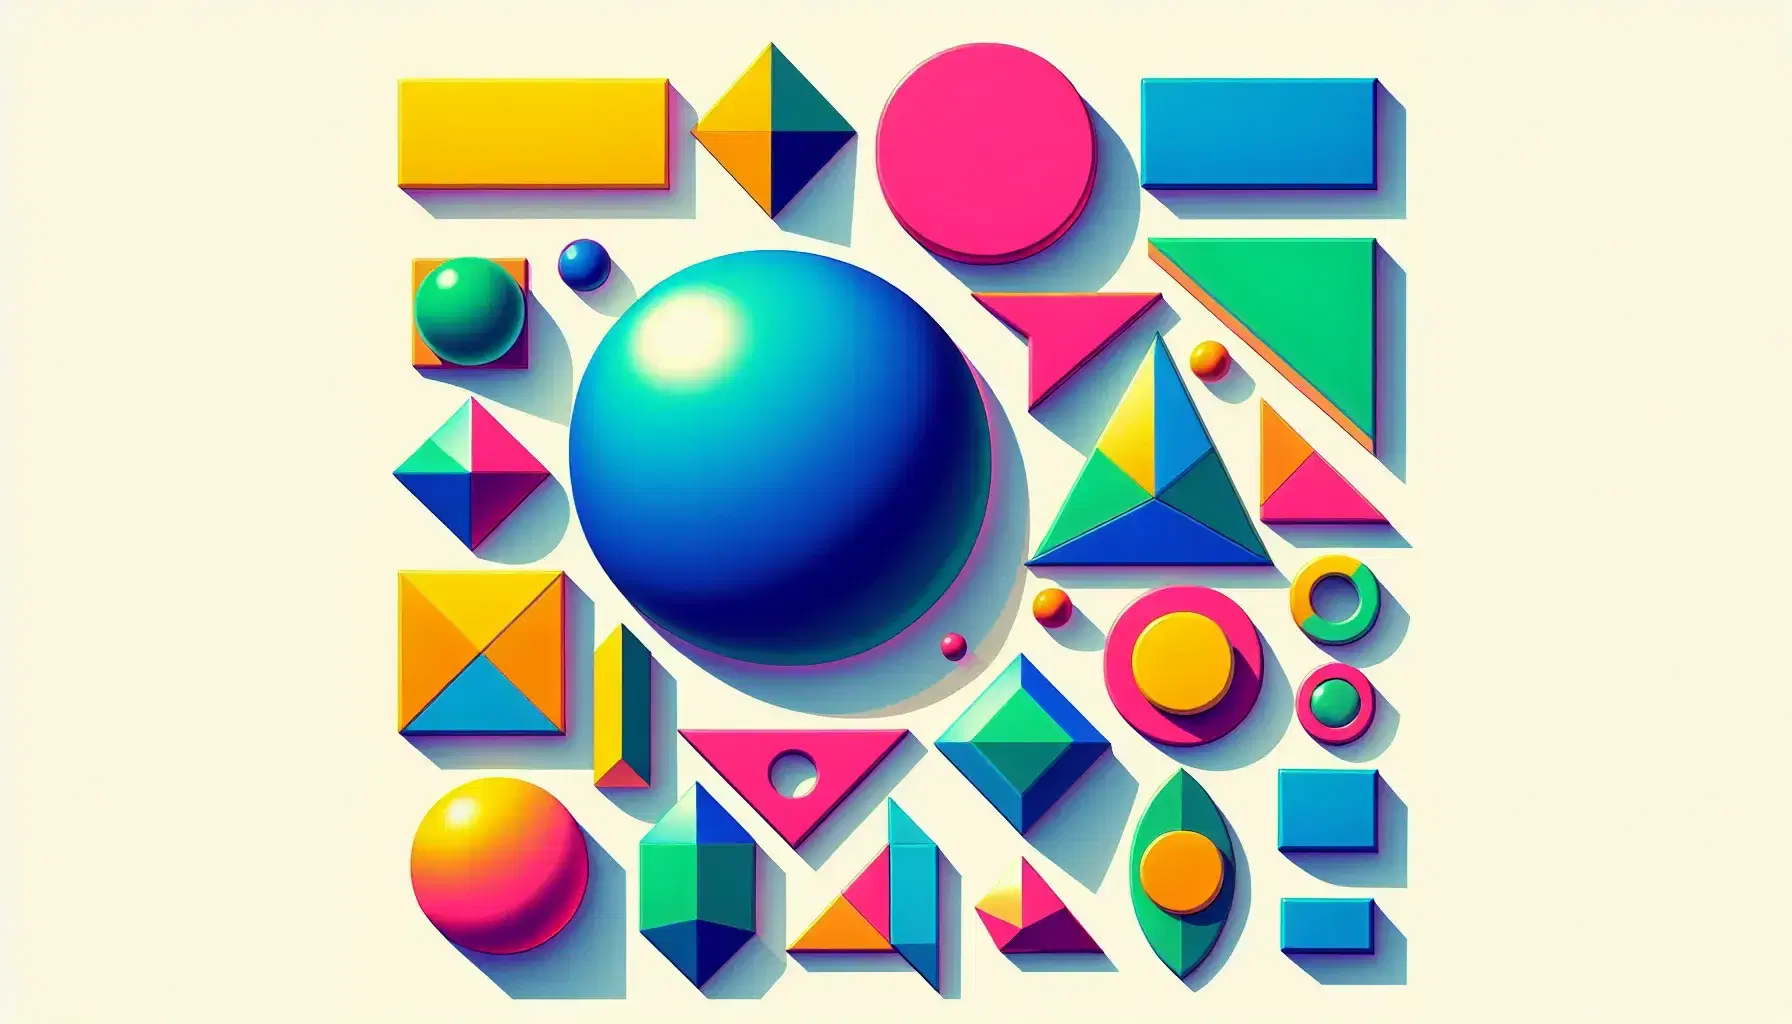 Brightly colored geometric shapes including a blue circle, red square, green triangle, and various polygons on a white background.